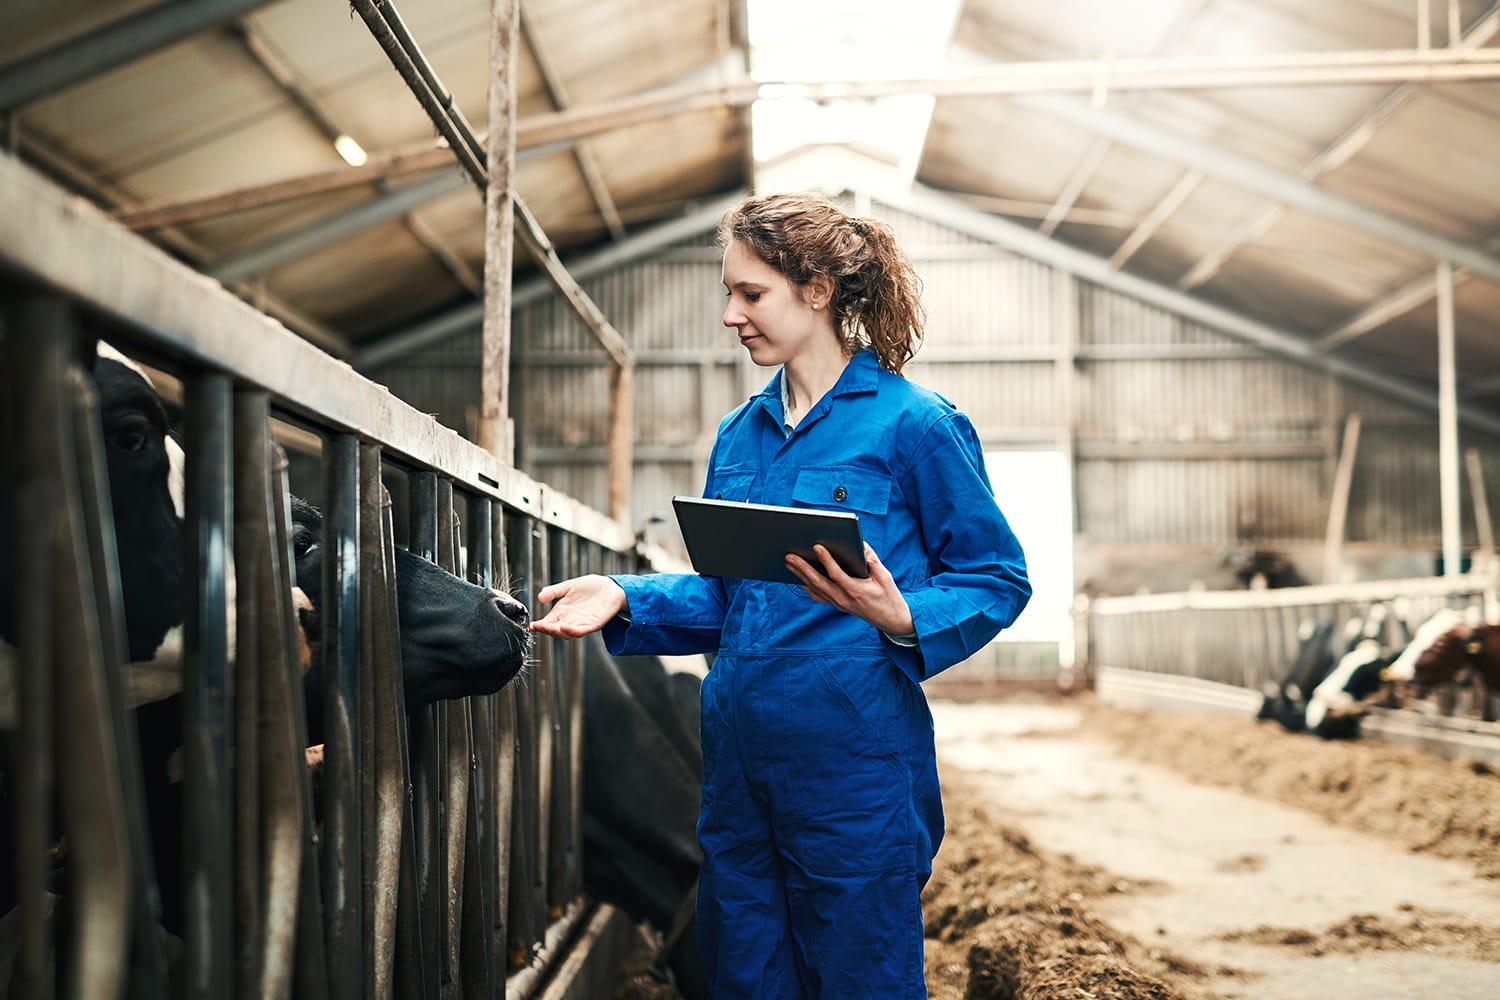 Female dairy farmer with laptop